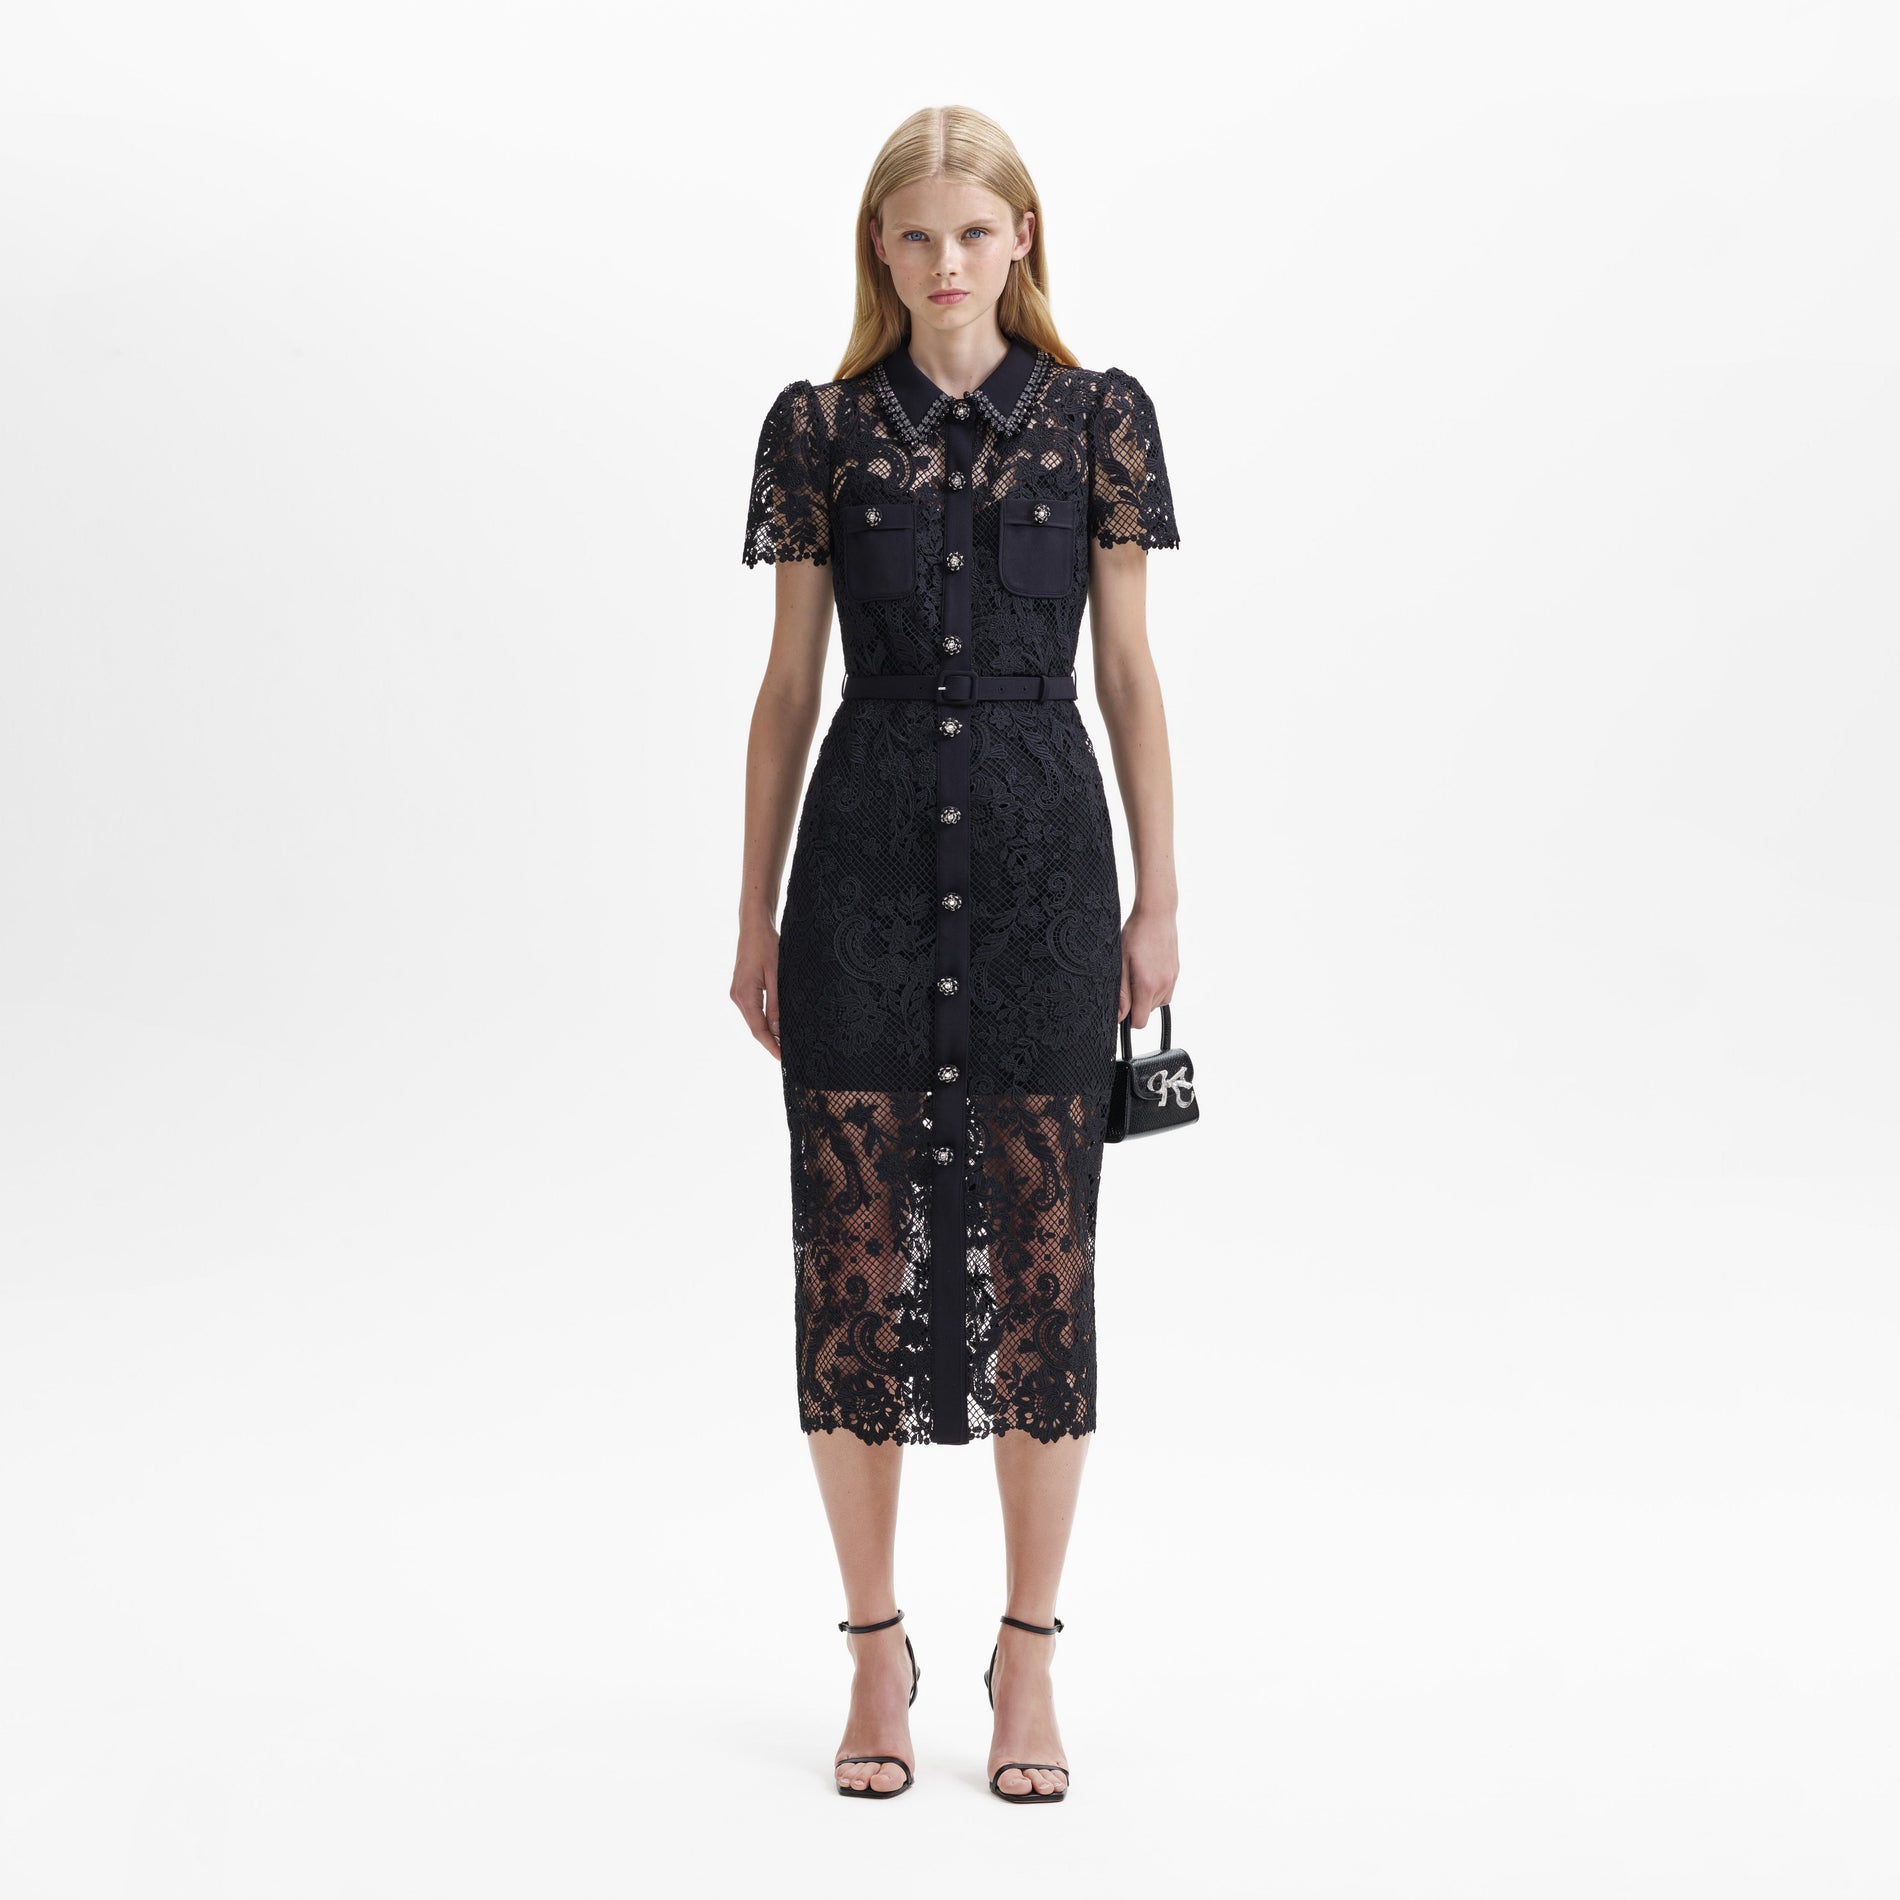 A woman wearing the Black Lace Button Front Midi Dress